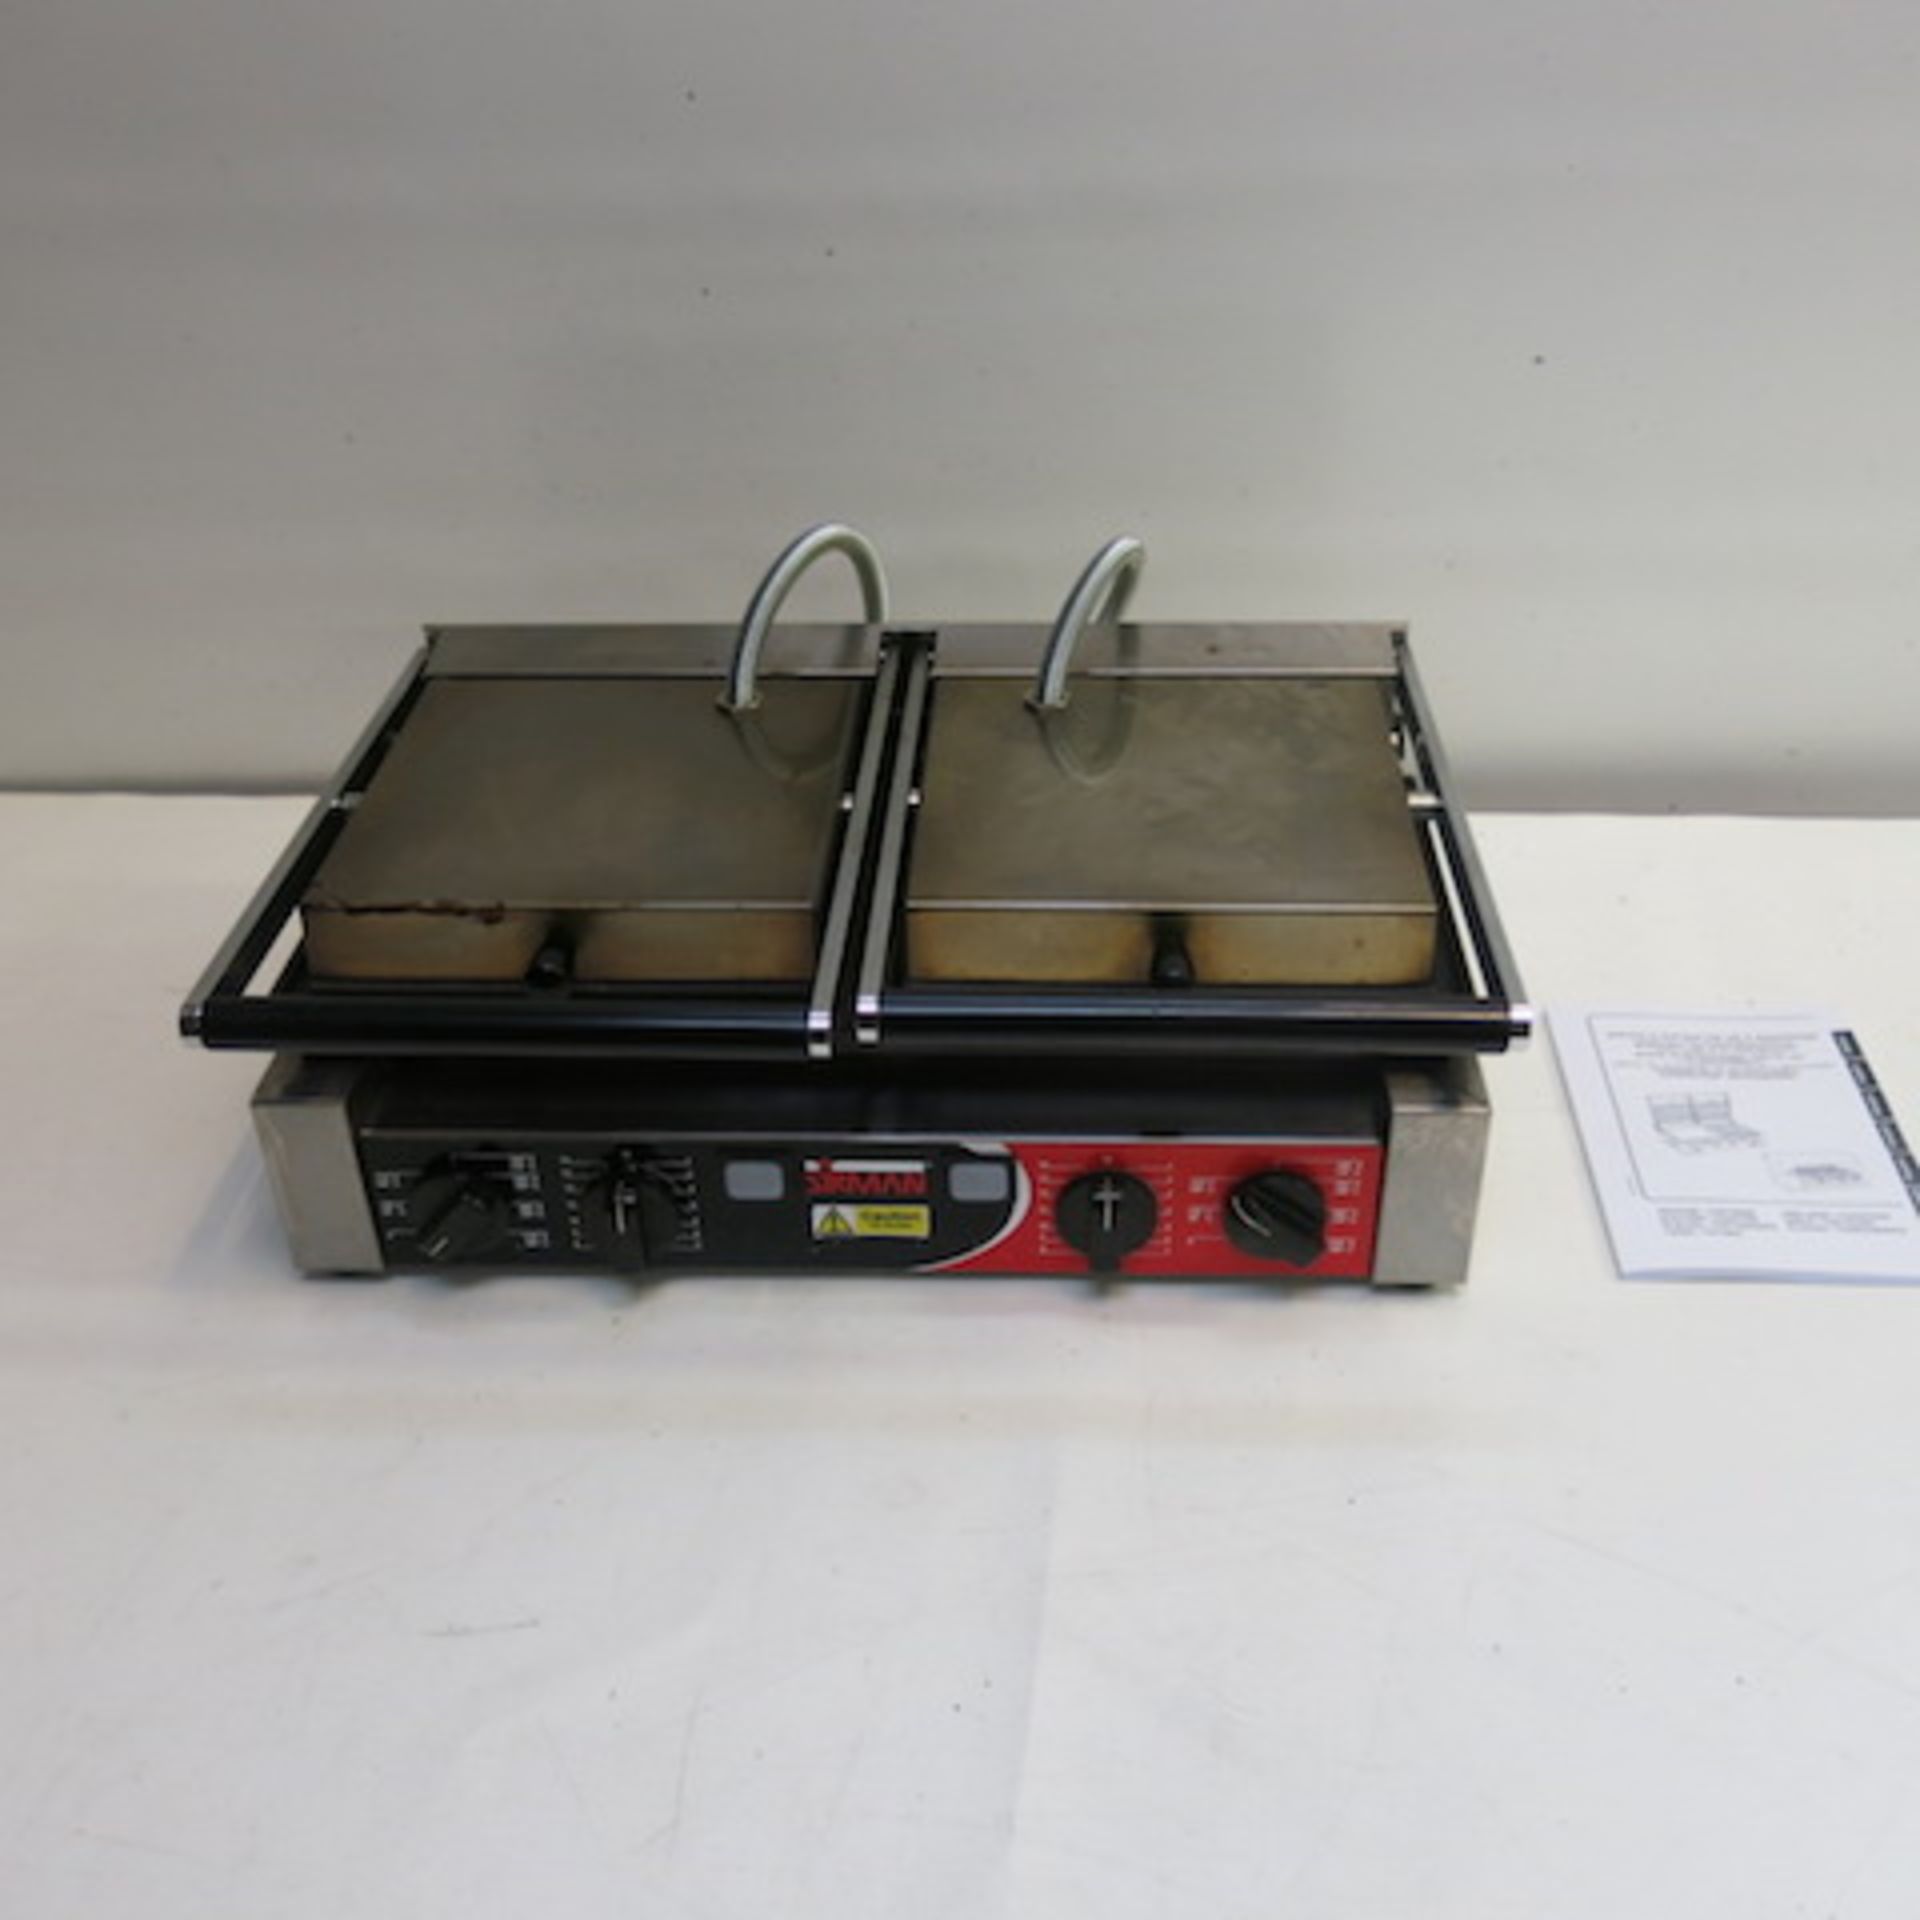 Sirman Stainless Steel Commercial Twin Panini Maker, Model PDRR/RR. Comes with Instruction Manual